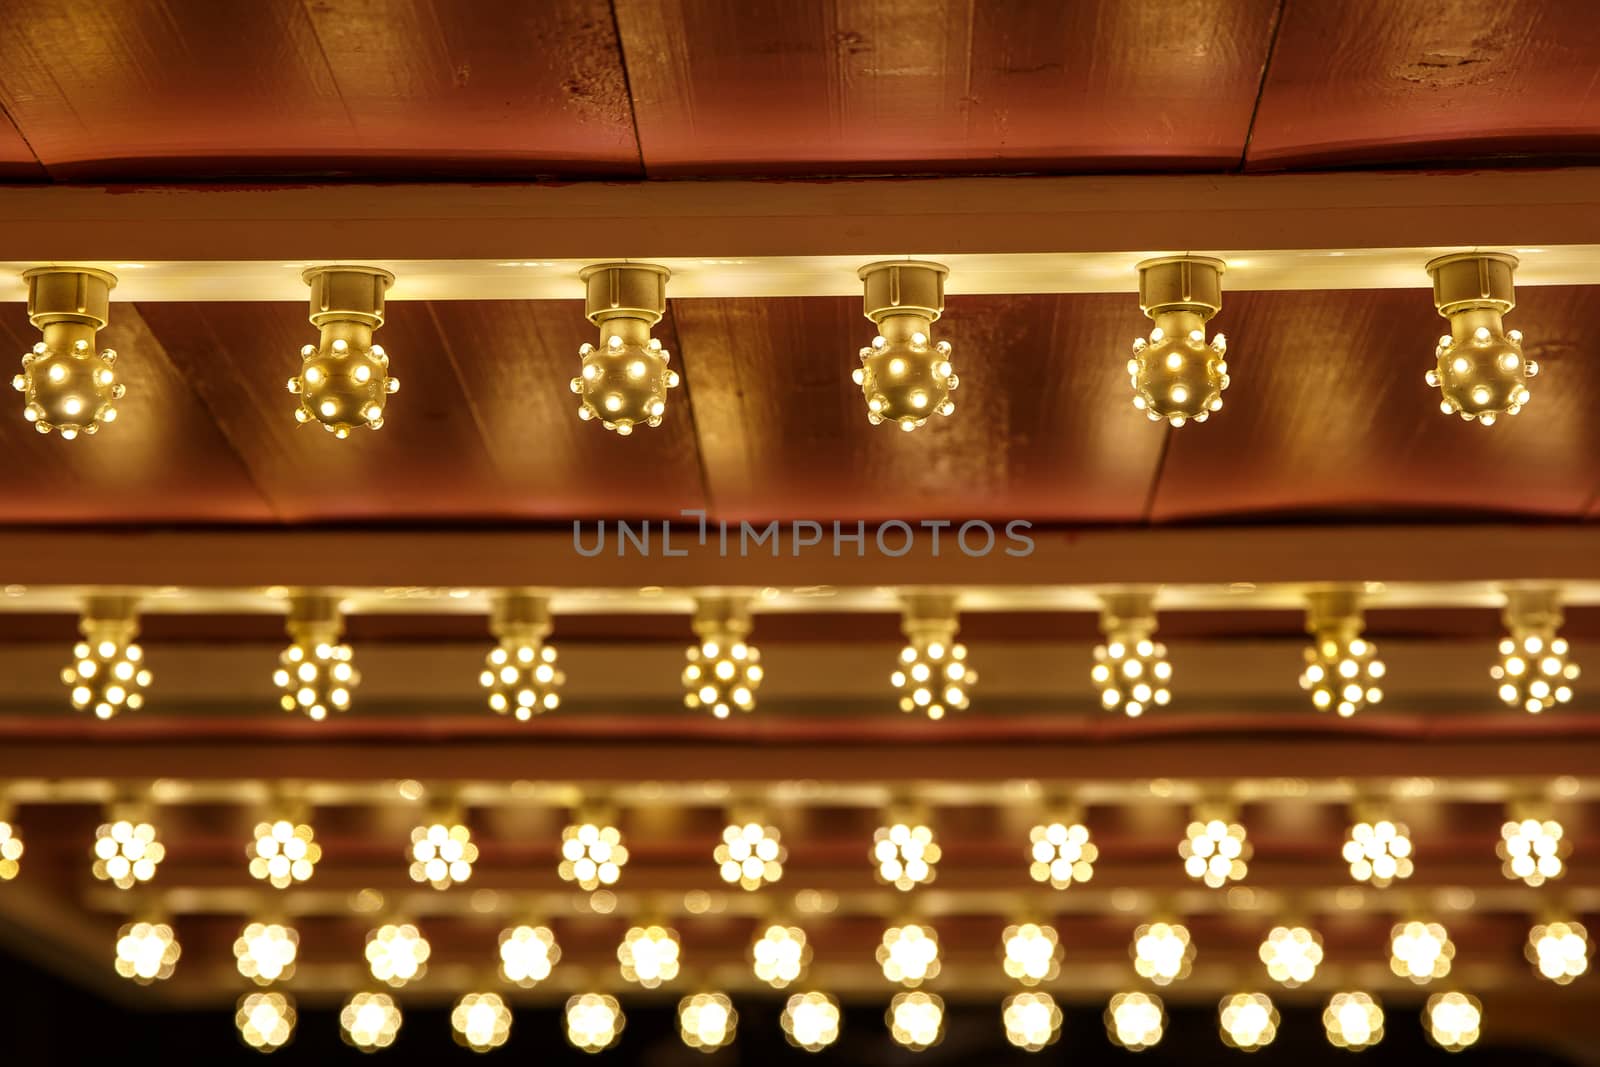 The row of incandescent bulbs. Lights background